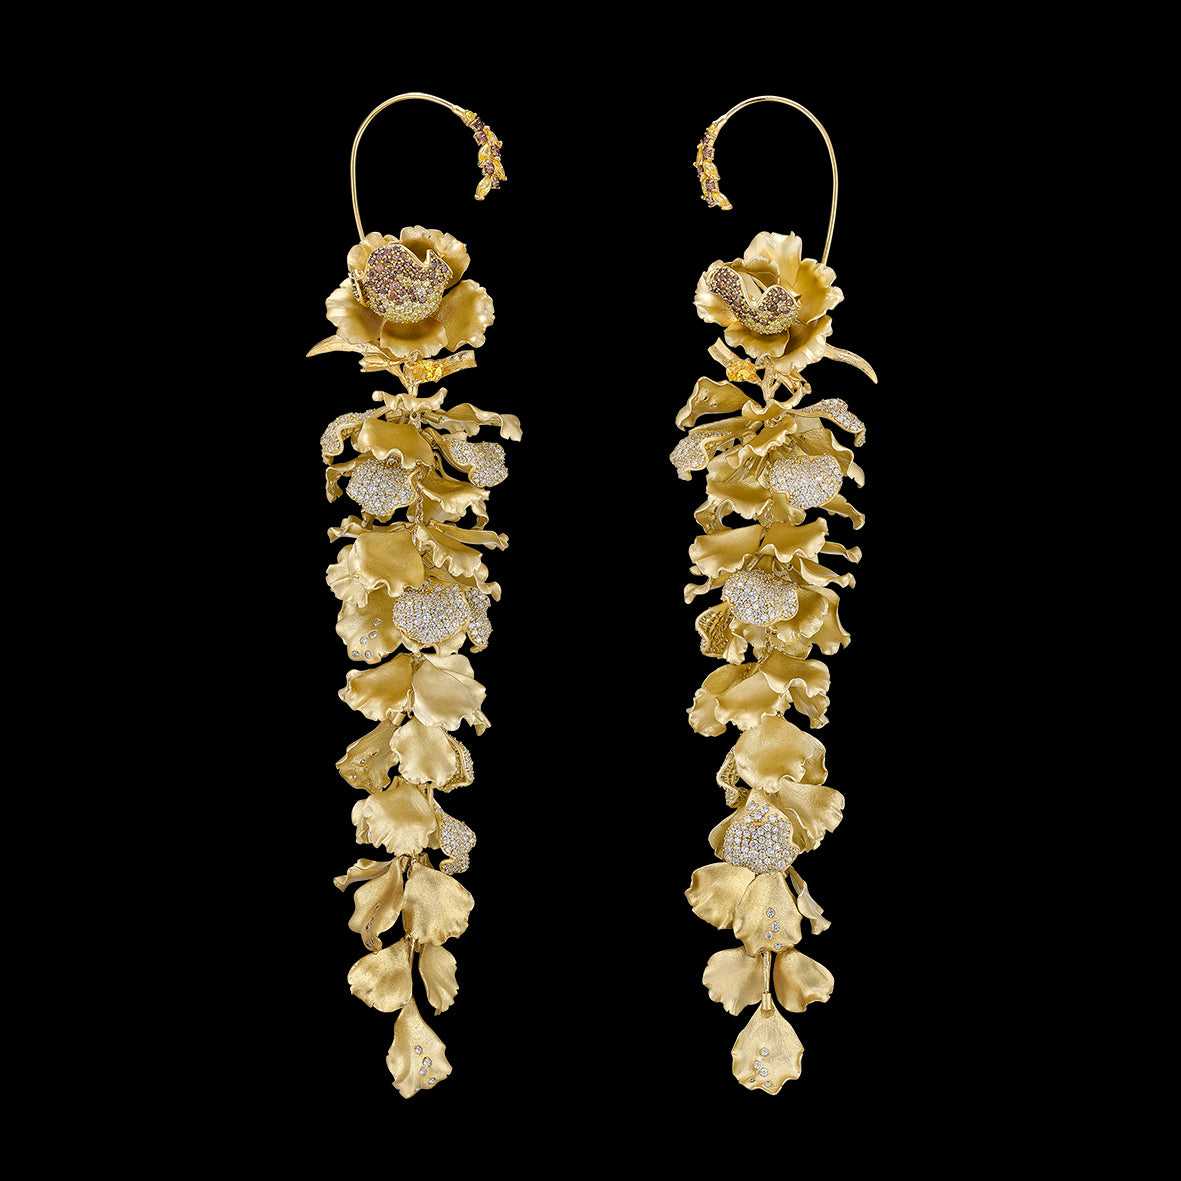 Golden Wisteria Earrings, Earrings, Anabela Chan Joaillerie - Fine jewelry with laboratory grown and created gemstones hand-crafted in the United Kingdom. Anabela Chan Joaillerie is the first fine jewellery brand in the world to champion laboratory-grown and created gemstones with high jewellery design, artisanal craftsmanship and a focus on ethical and sustainable innovations.